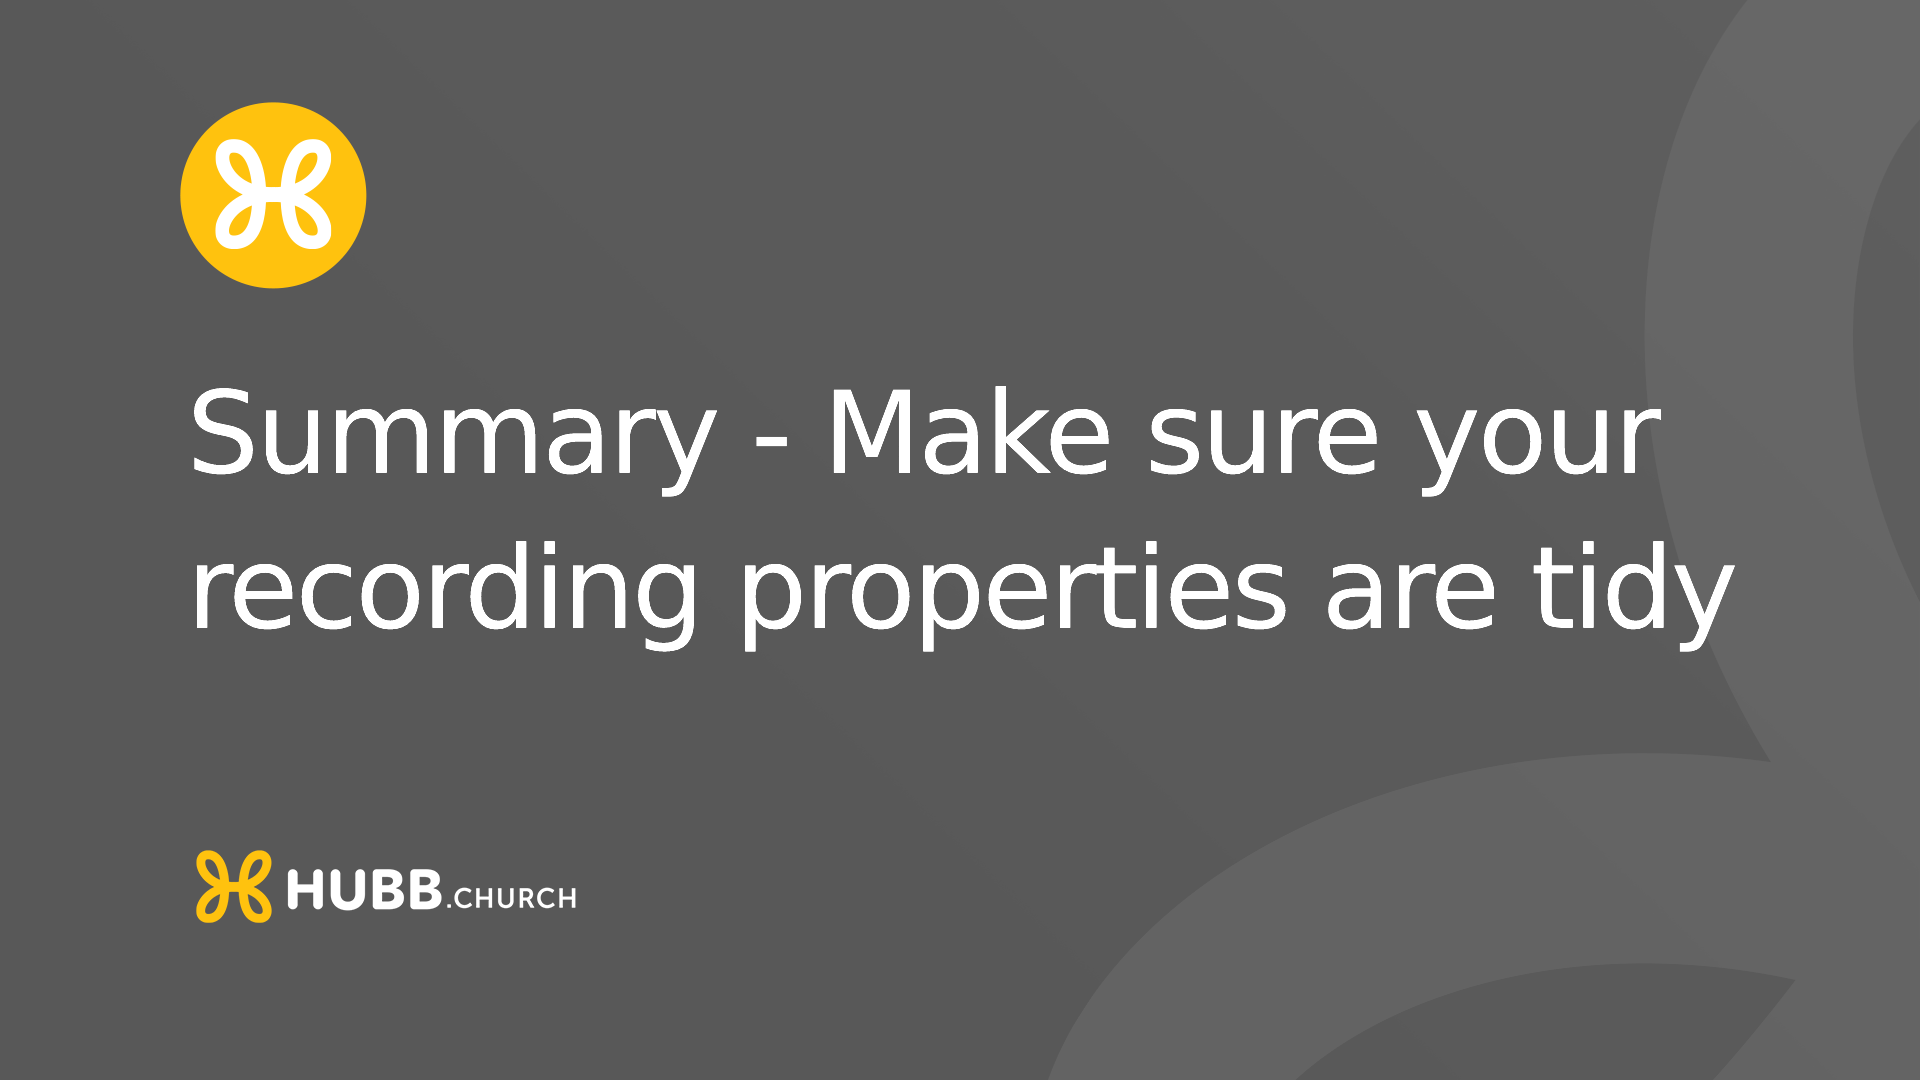 Summary - Make sure your recording properties are tidy